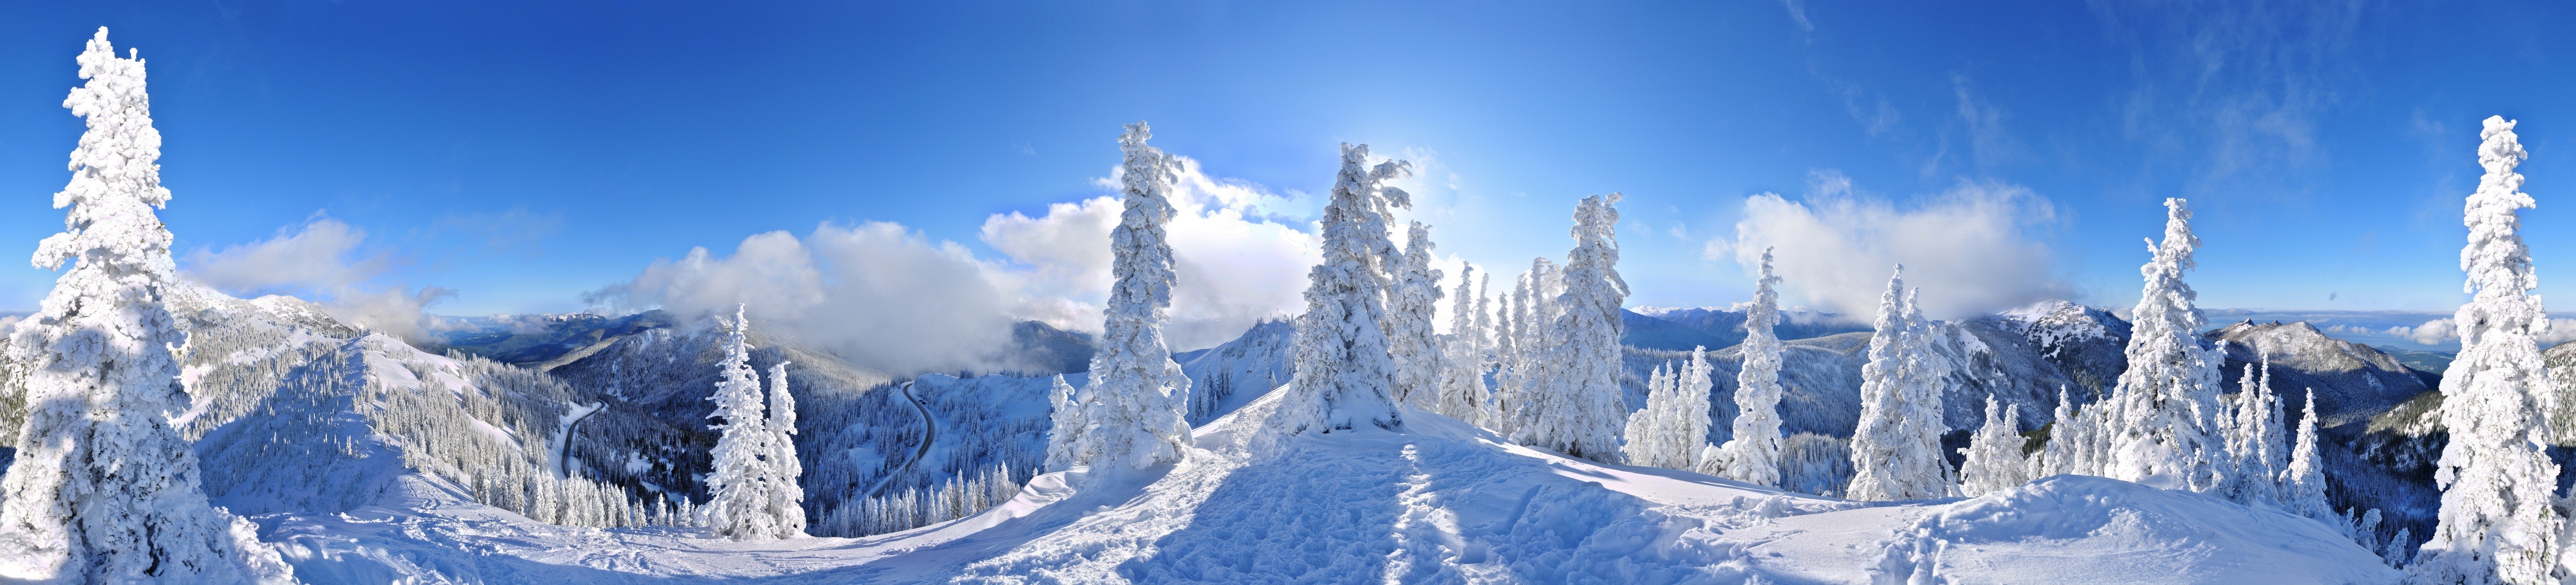 Panoramas Winter Forest Snow Mountains Trees Road Clouds Nature Landscape White 4759x1080